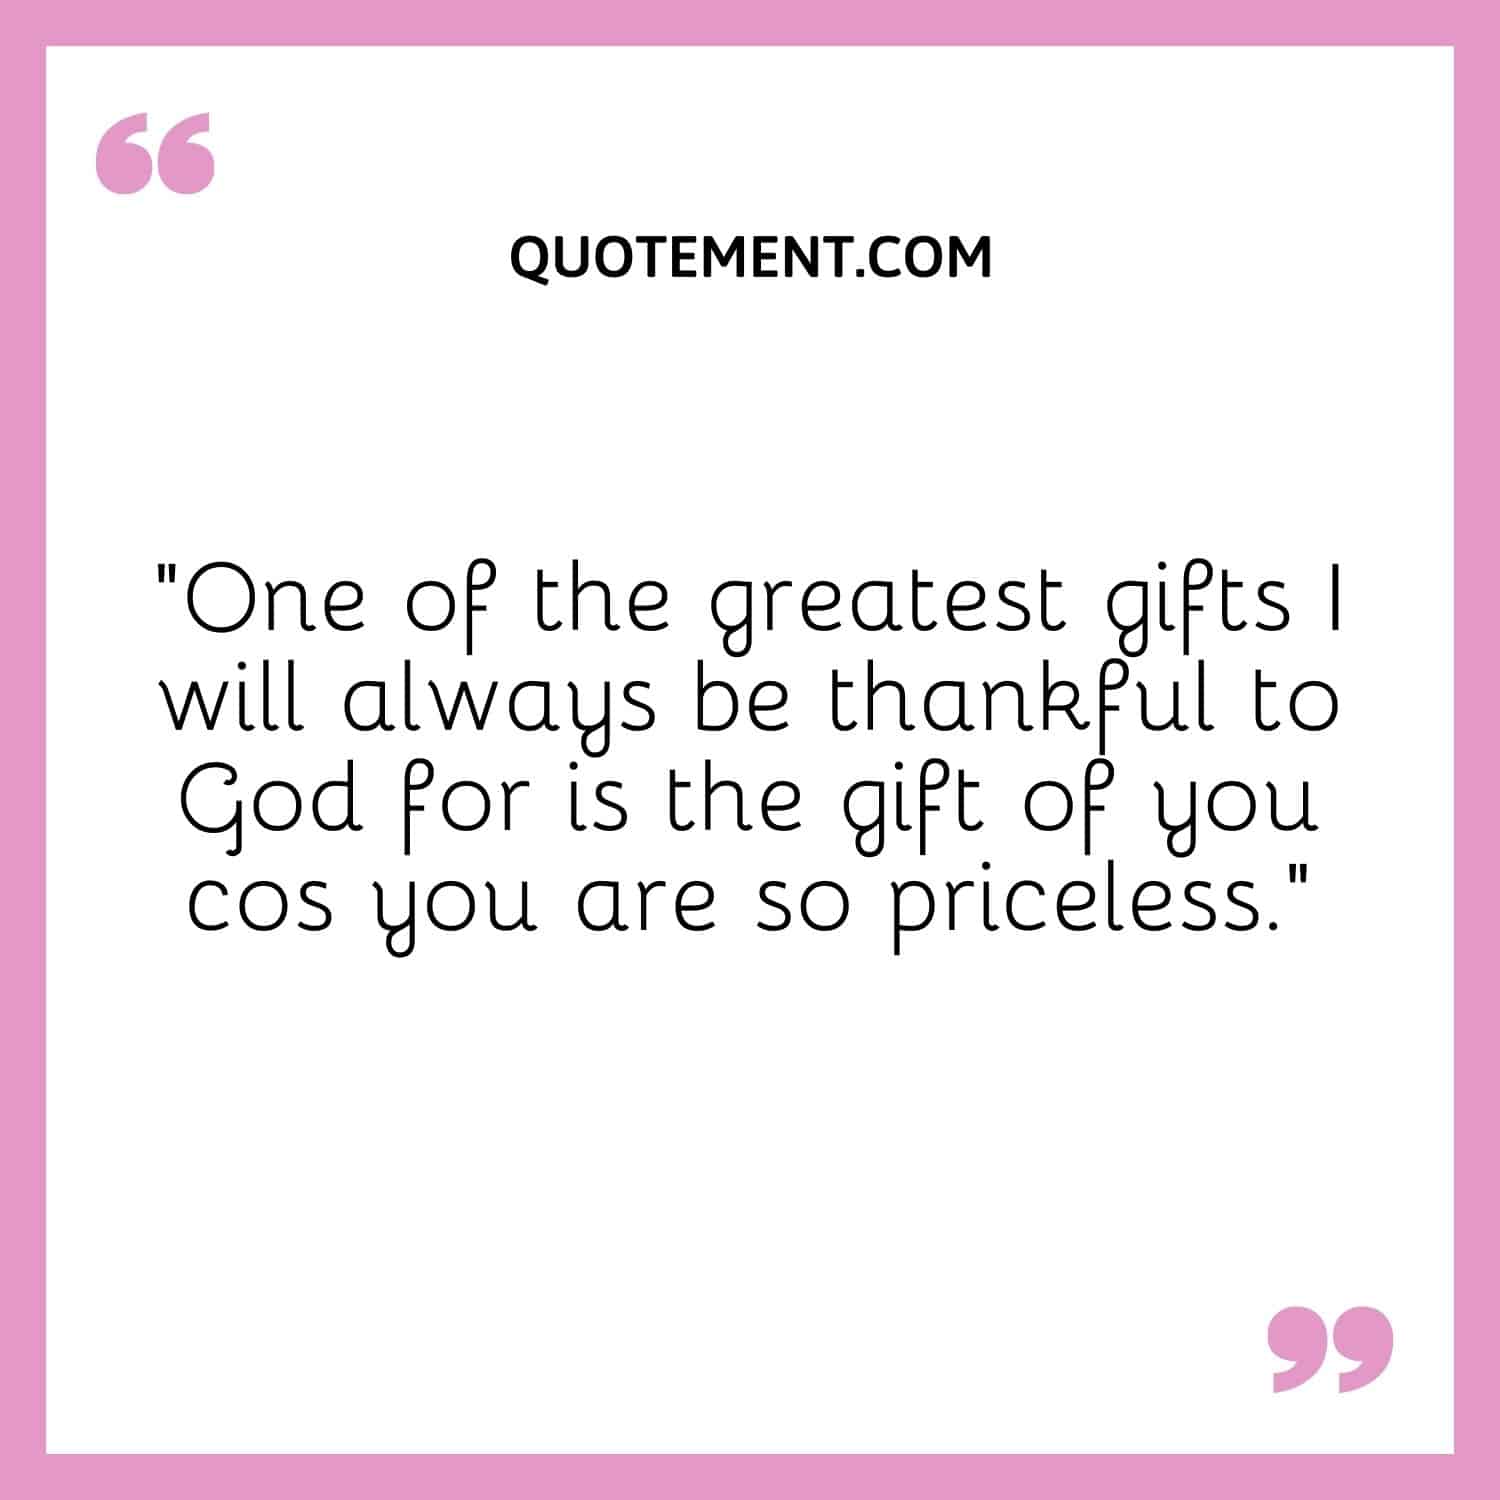 “One of the greatest gifts I will always be thankful to God for is the gift of you cos you are so priceless.”